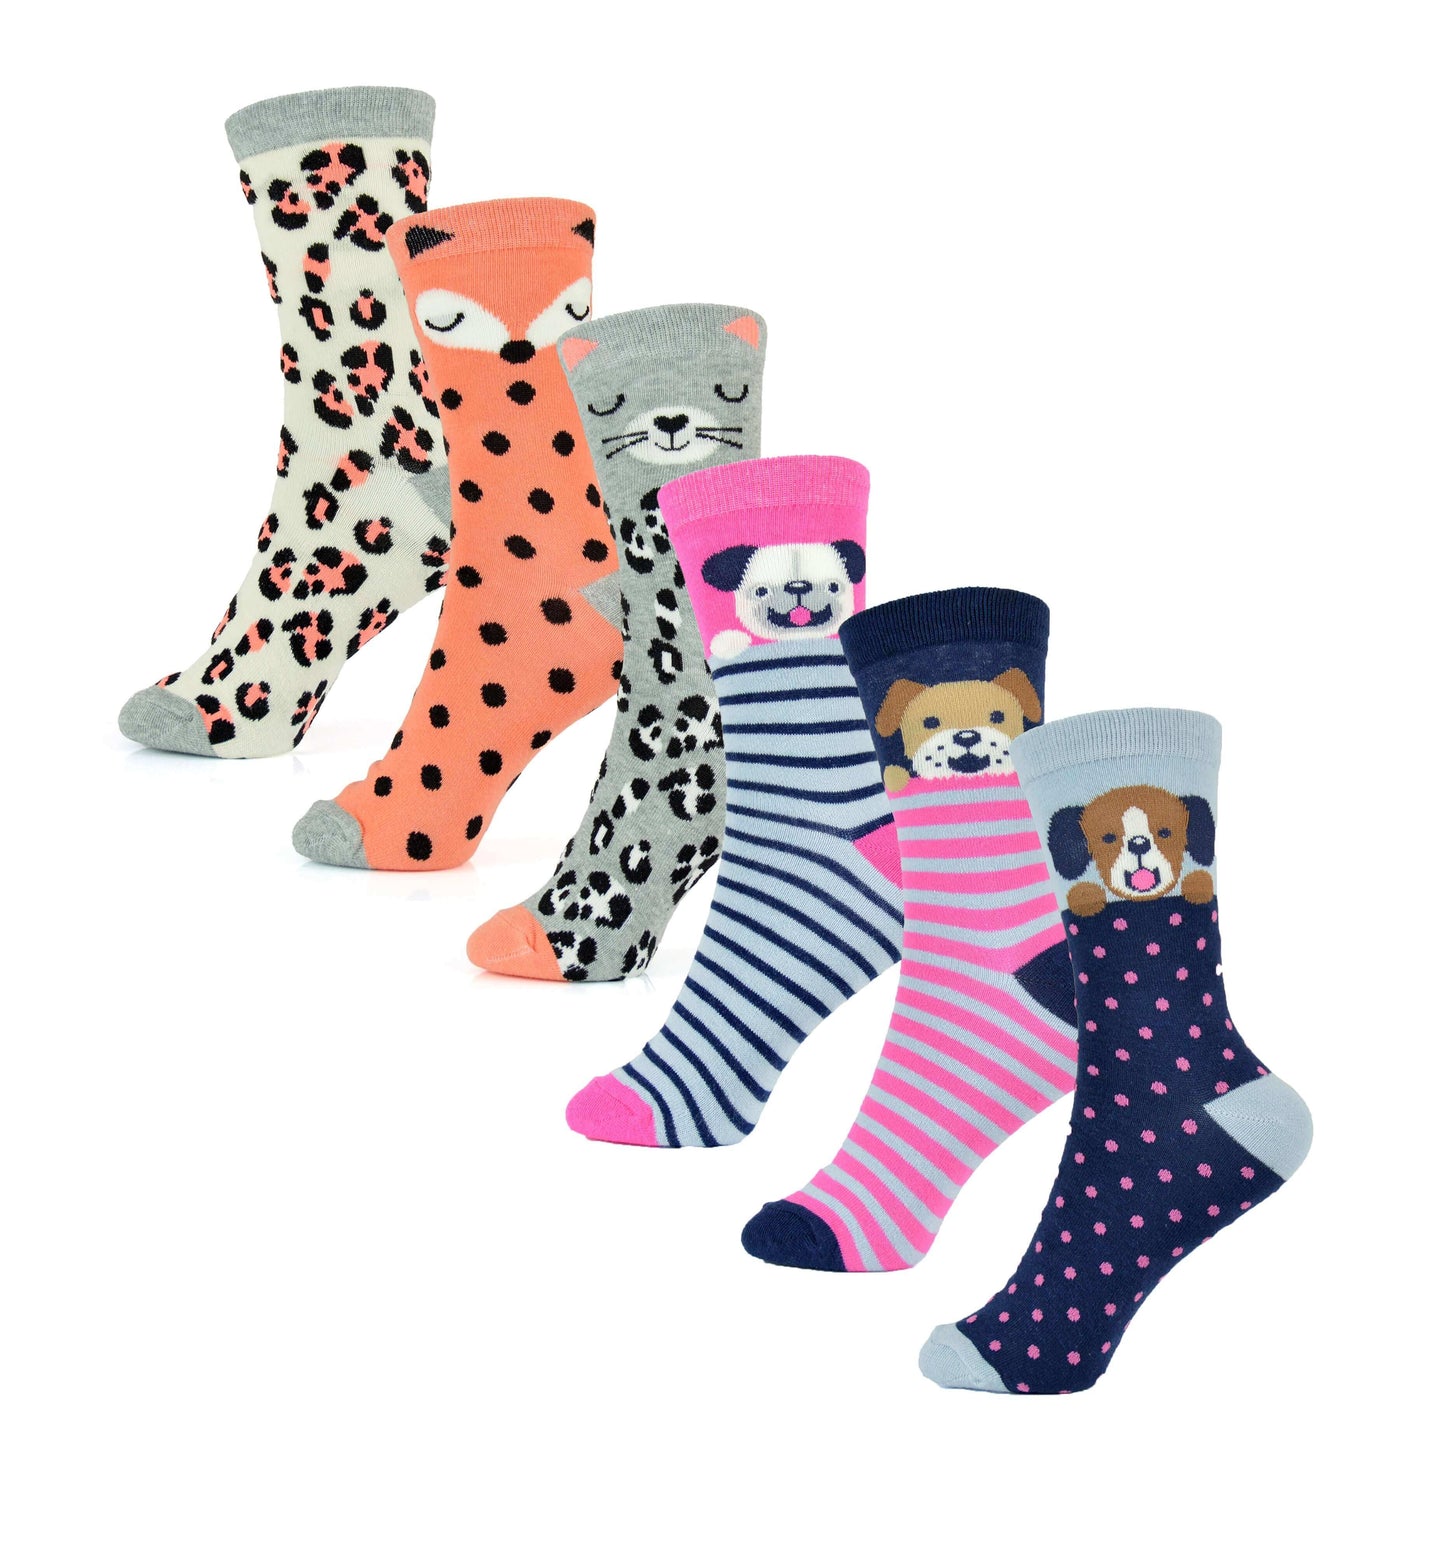 Pack Of 6 Women's Design Socks Easy Care Every Day Cotton Rich Sock For Ladies. Buy now for £8.00. A Socks by Sock Stack. 4-7, animals, argyle, assorted, black, black socks, blue, boot, boot socks, breathable, cats, cats dogs, comfortable, cosy, cotton, d